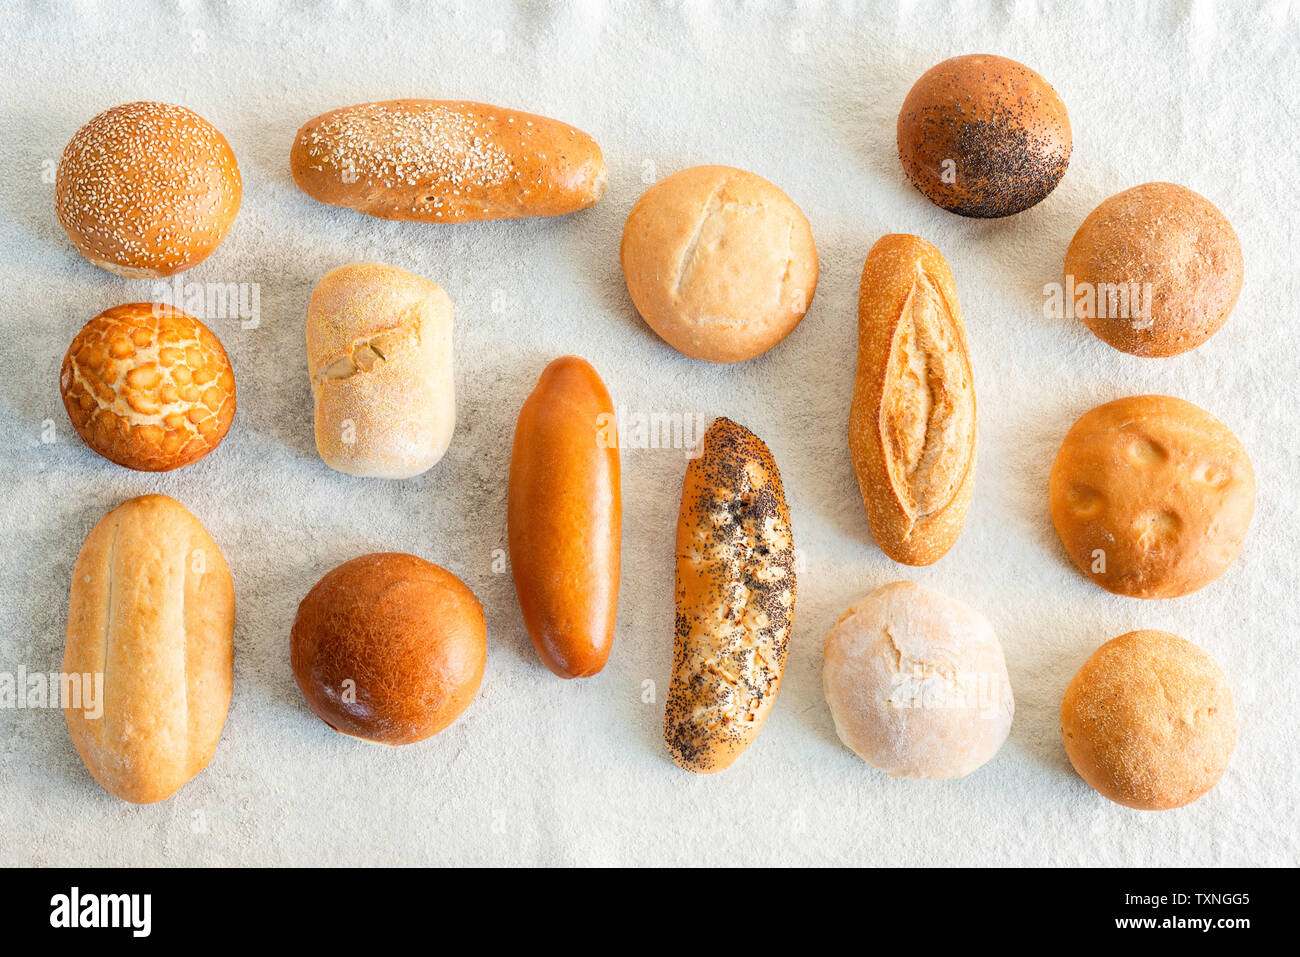 Large variety of wholemeal and white bread rolls, overhead view Stock Photo